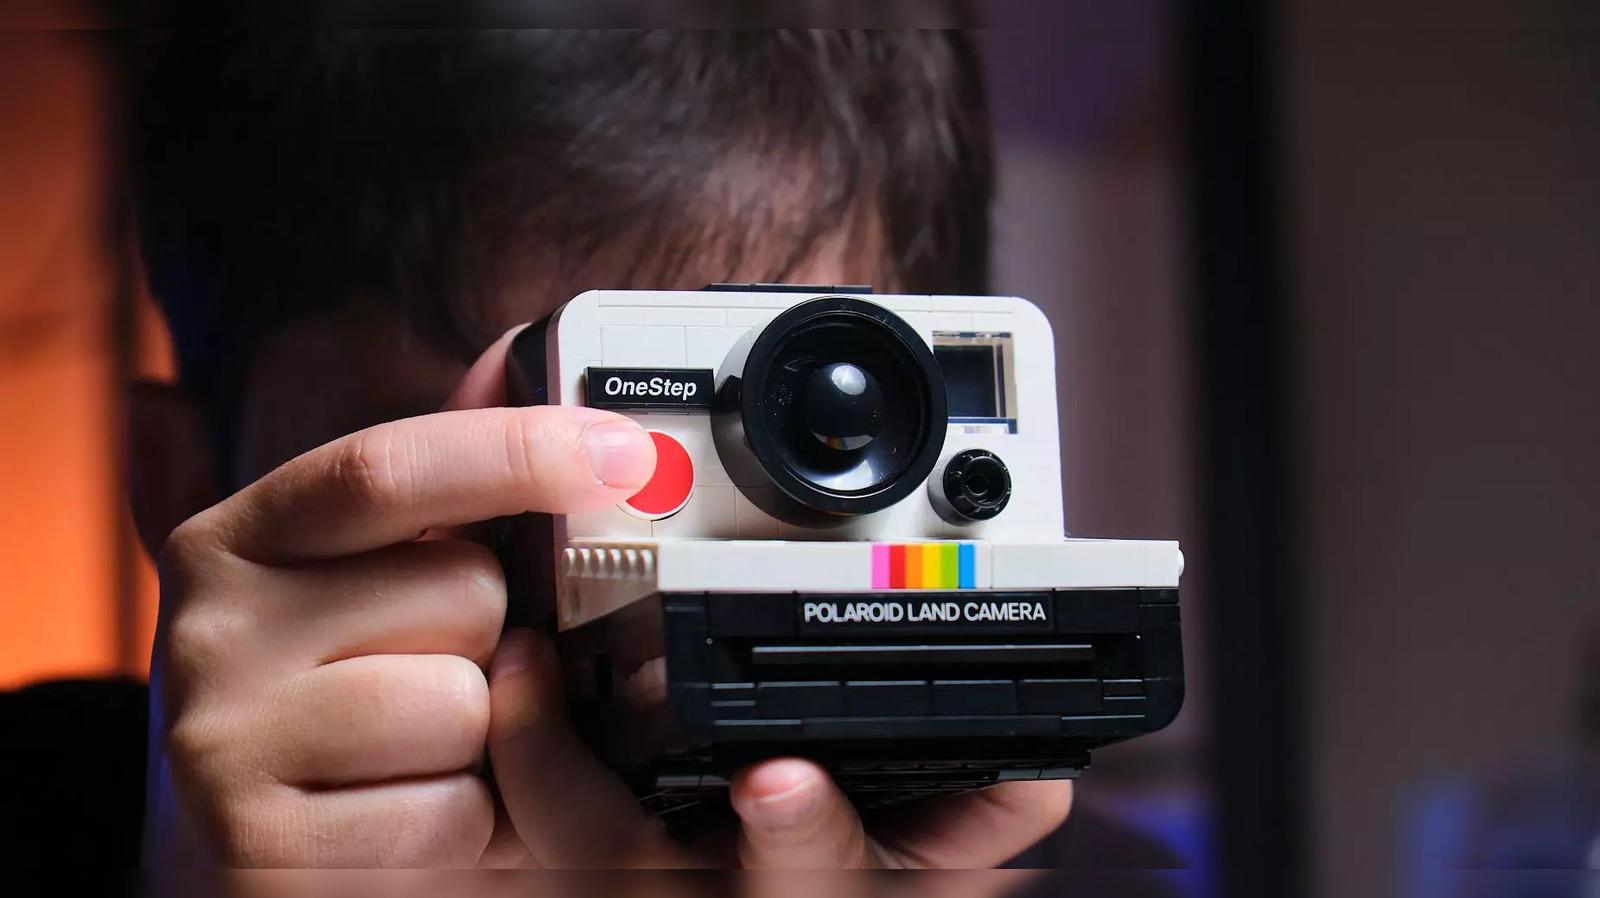 The Polaroid OneStep SX-70 is getting the Lego treatment - Acquire